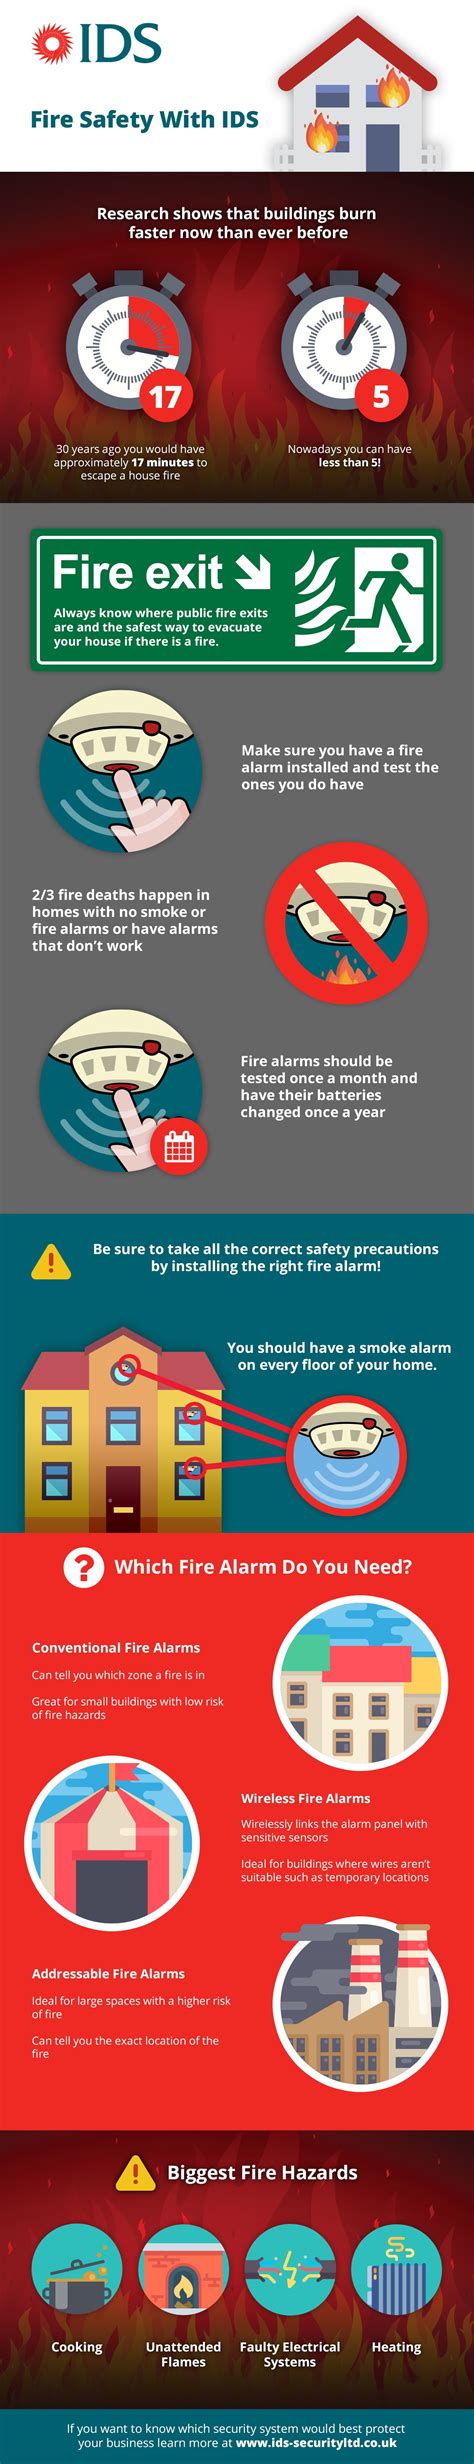 Infographic Fire Safety The 4 Elements Of A Fire Safetyvantage - Riset